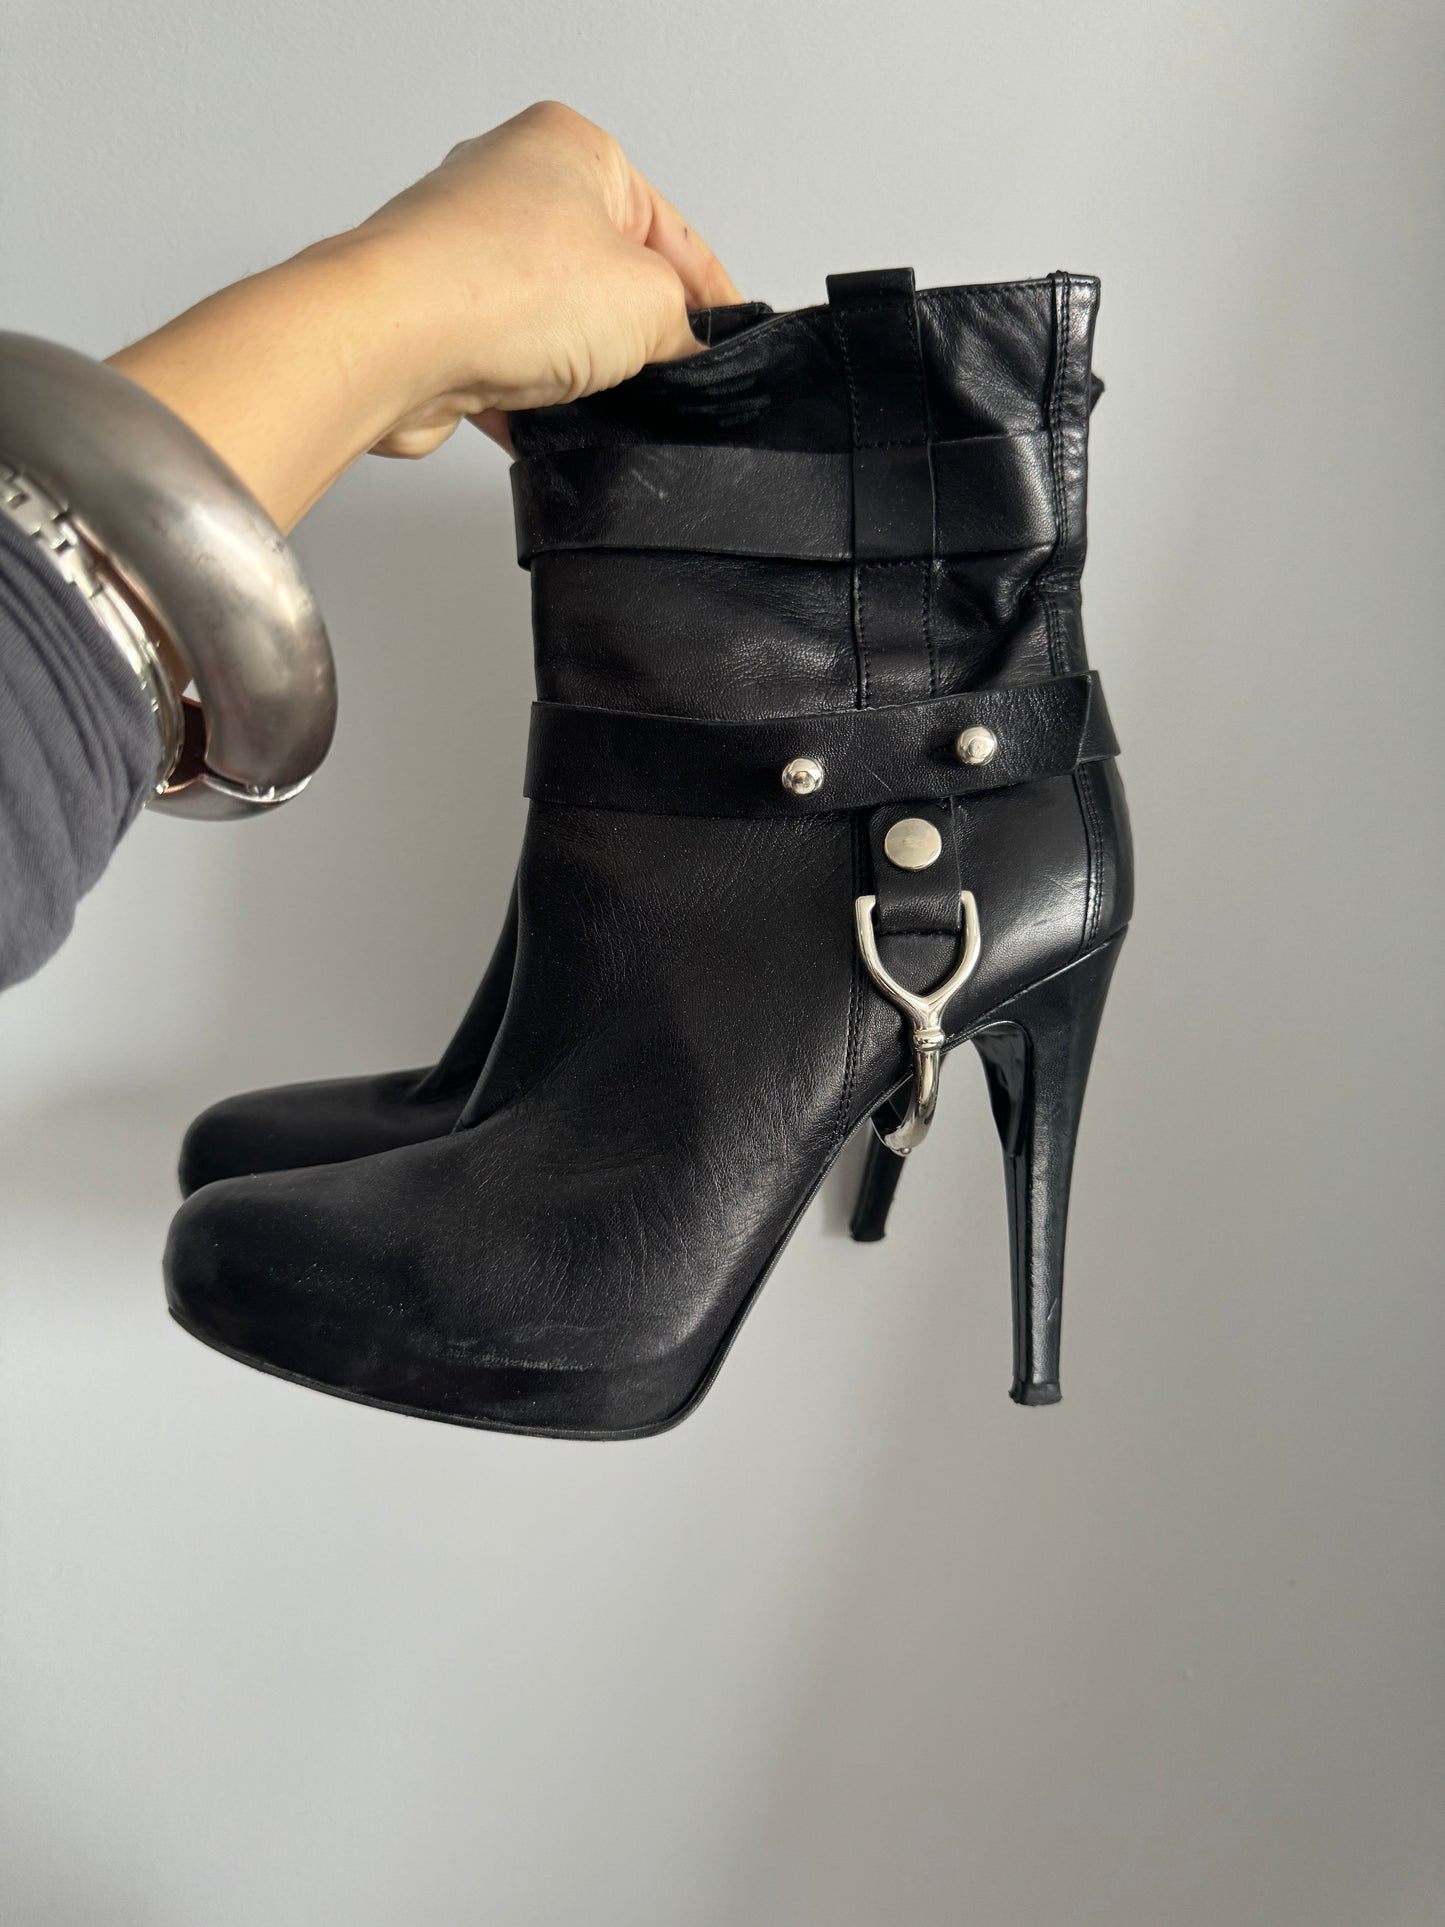 Leather Heeled Buckle Boots Size 9